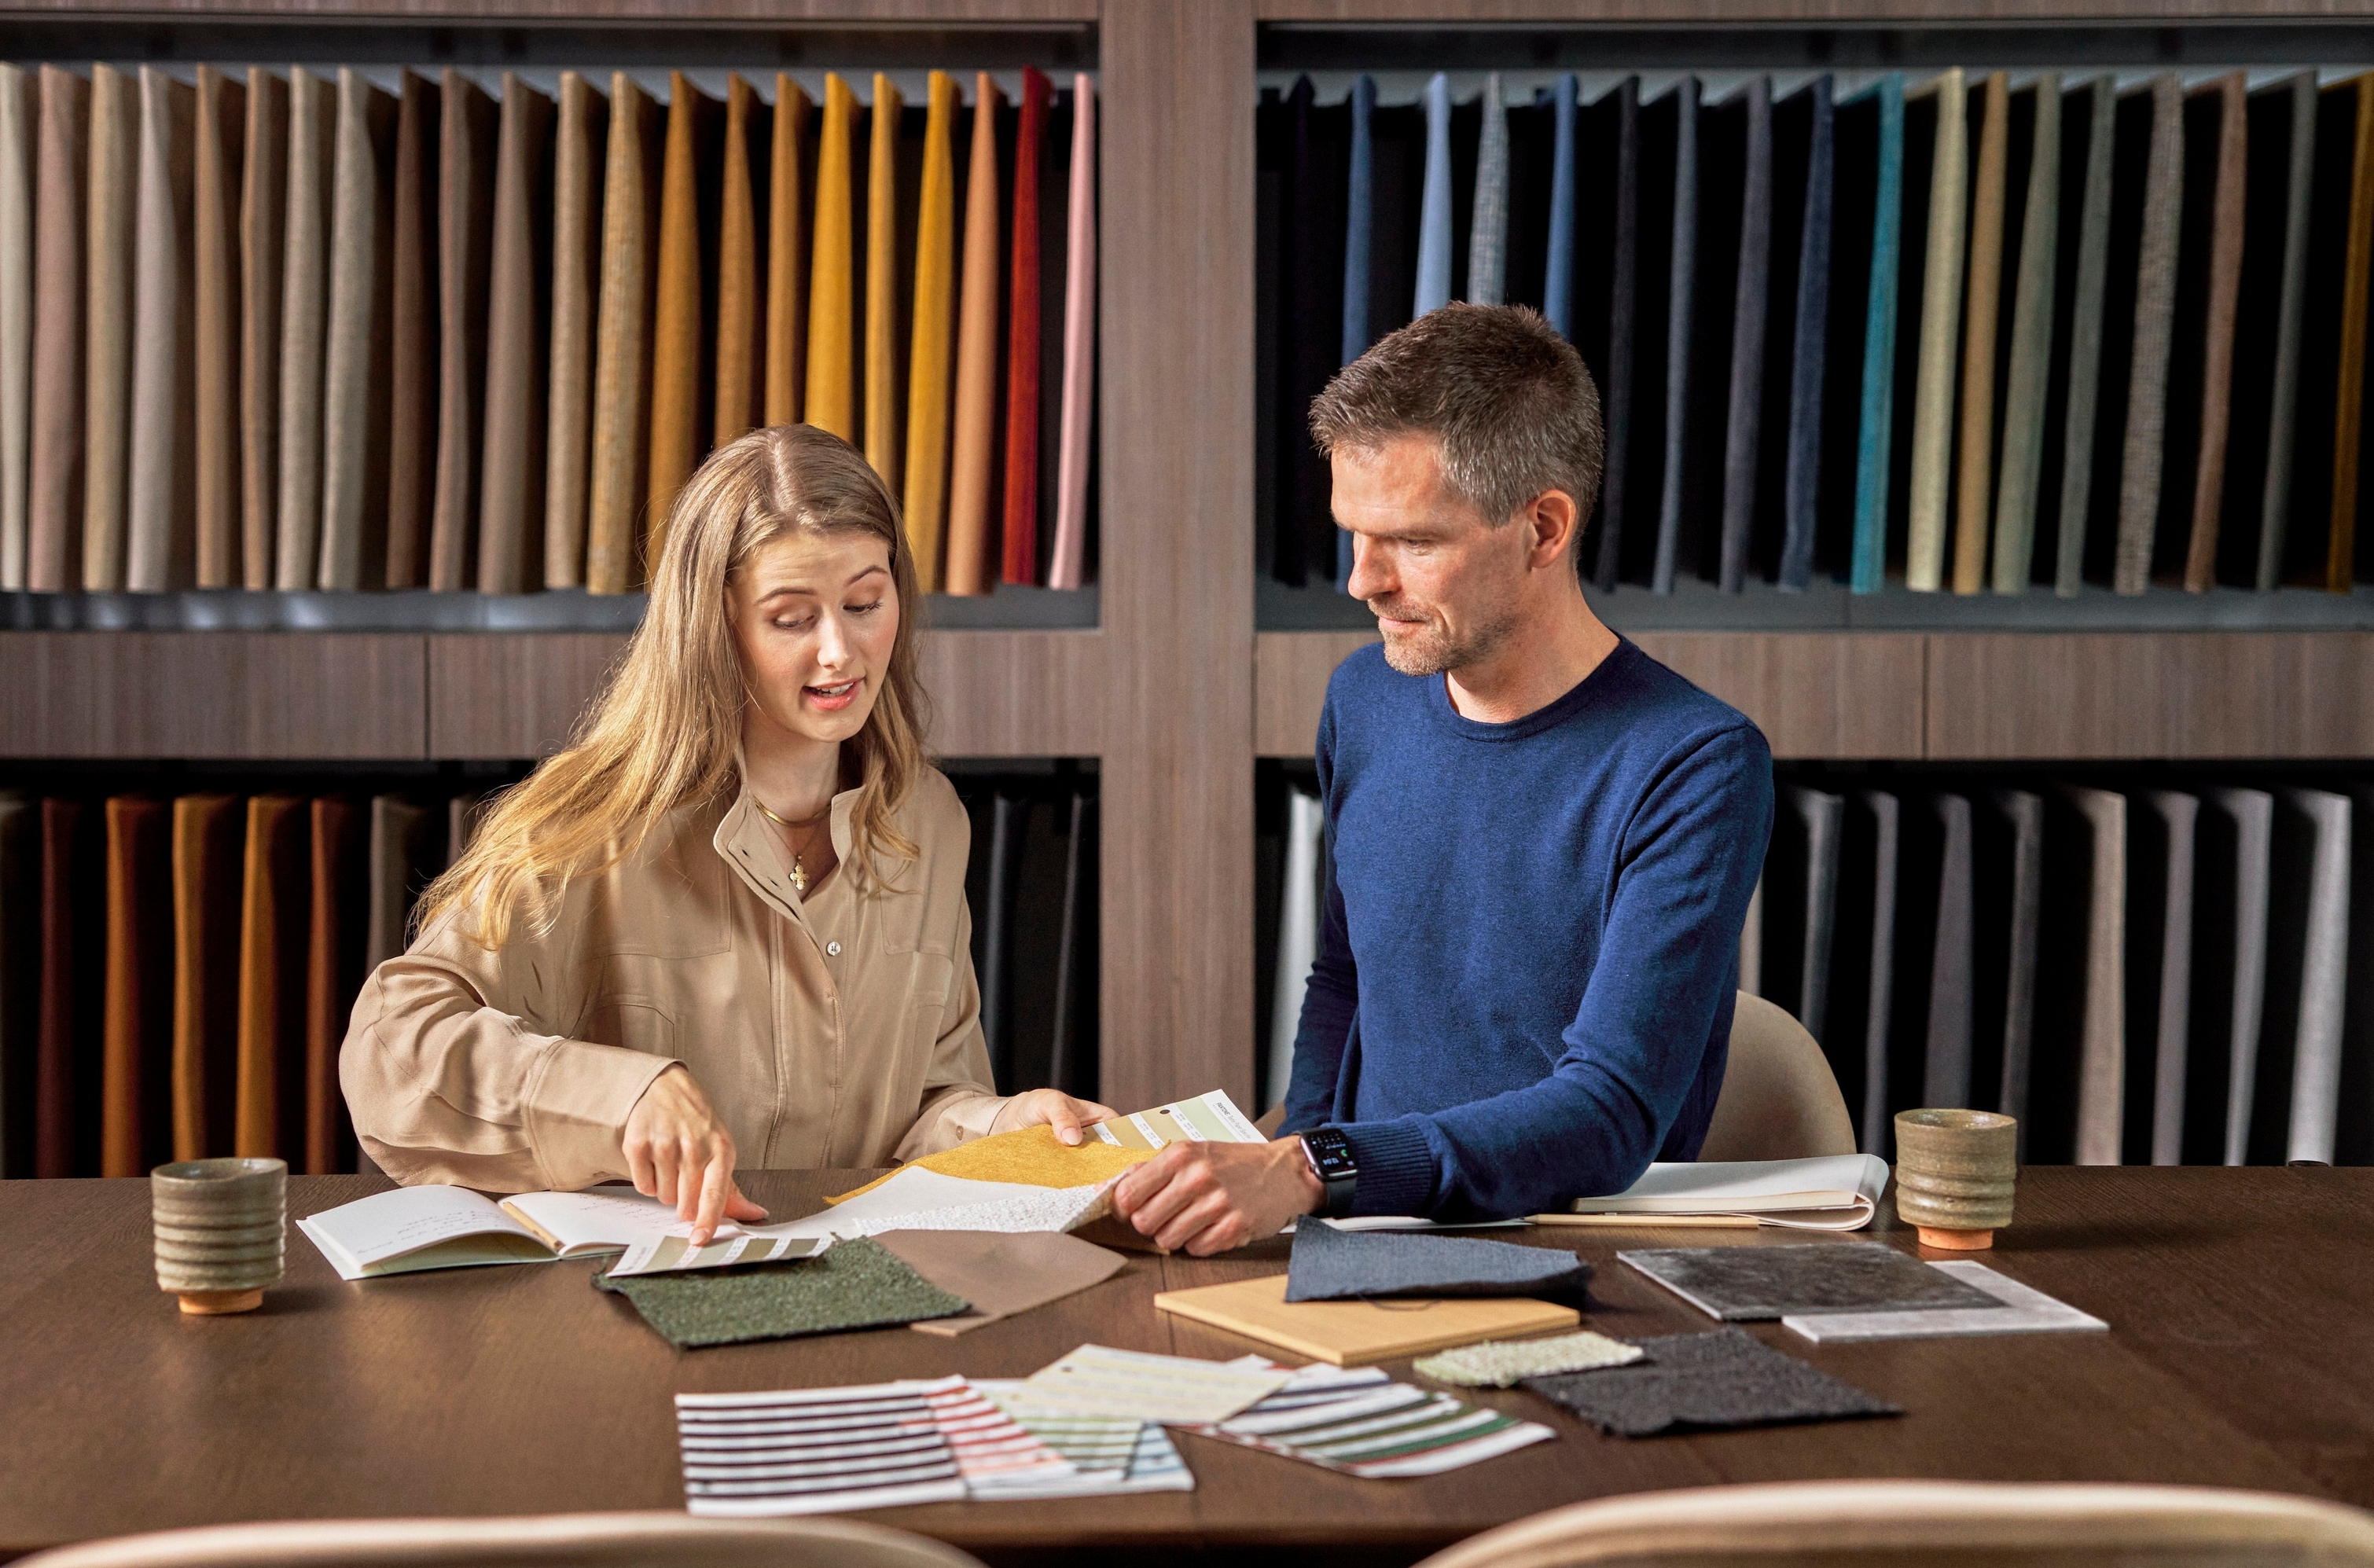 Two people examining fabric samples at a table with color swatches in the background.